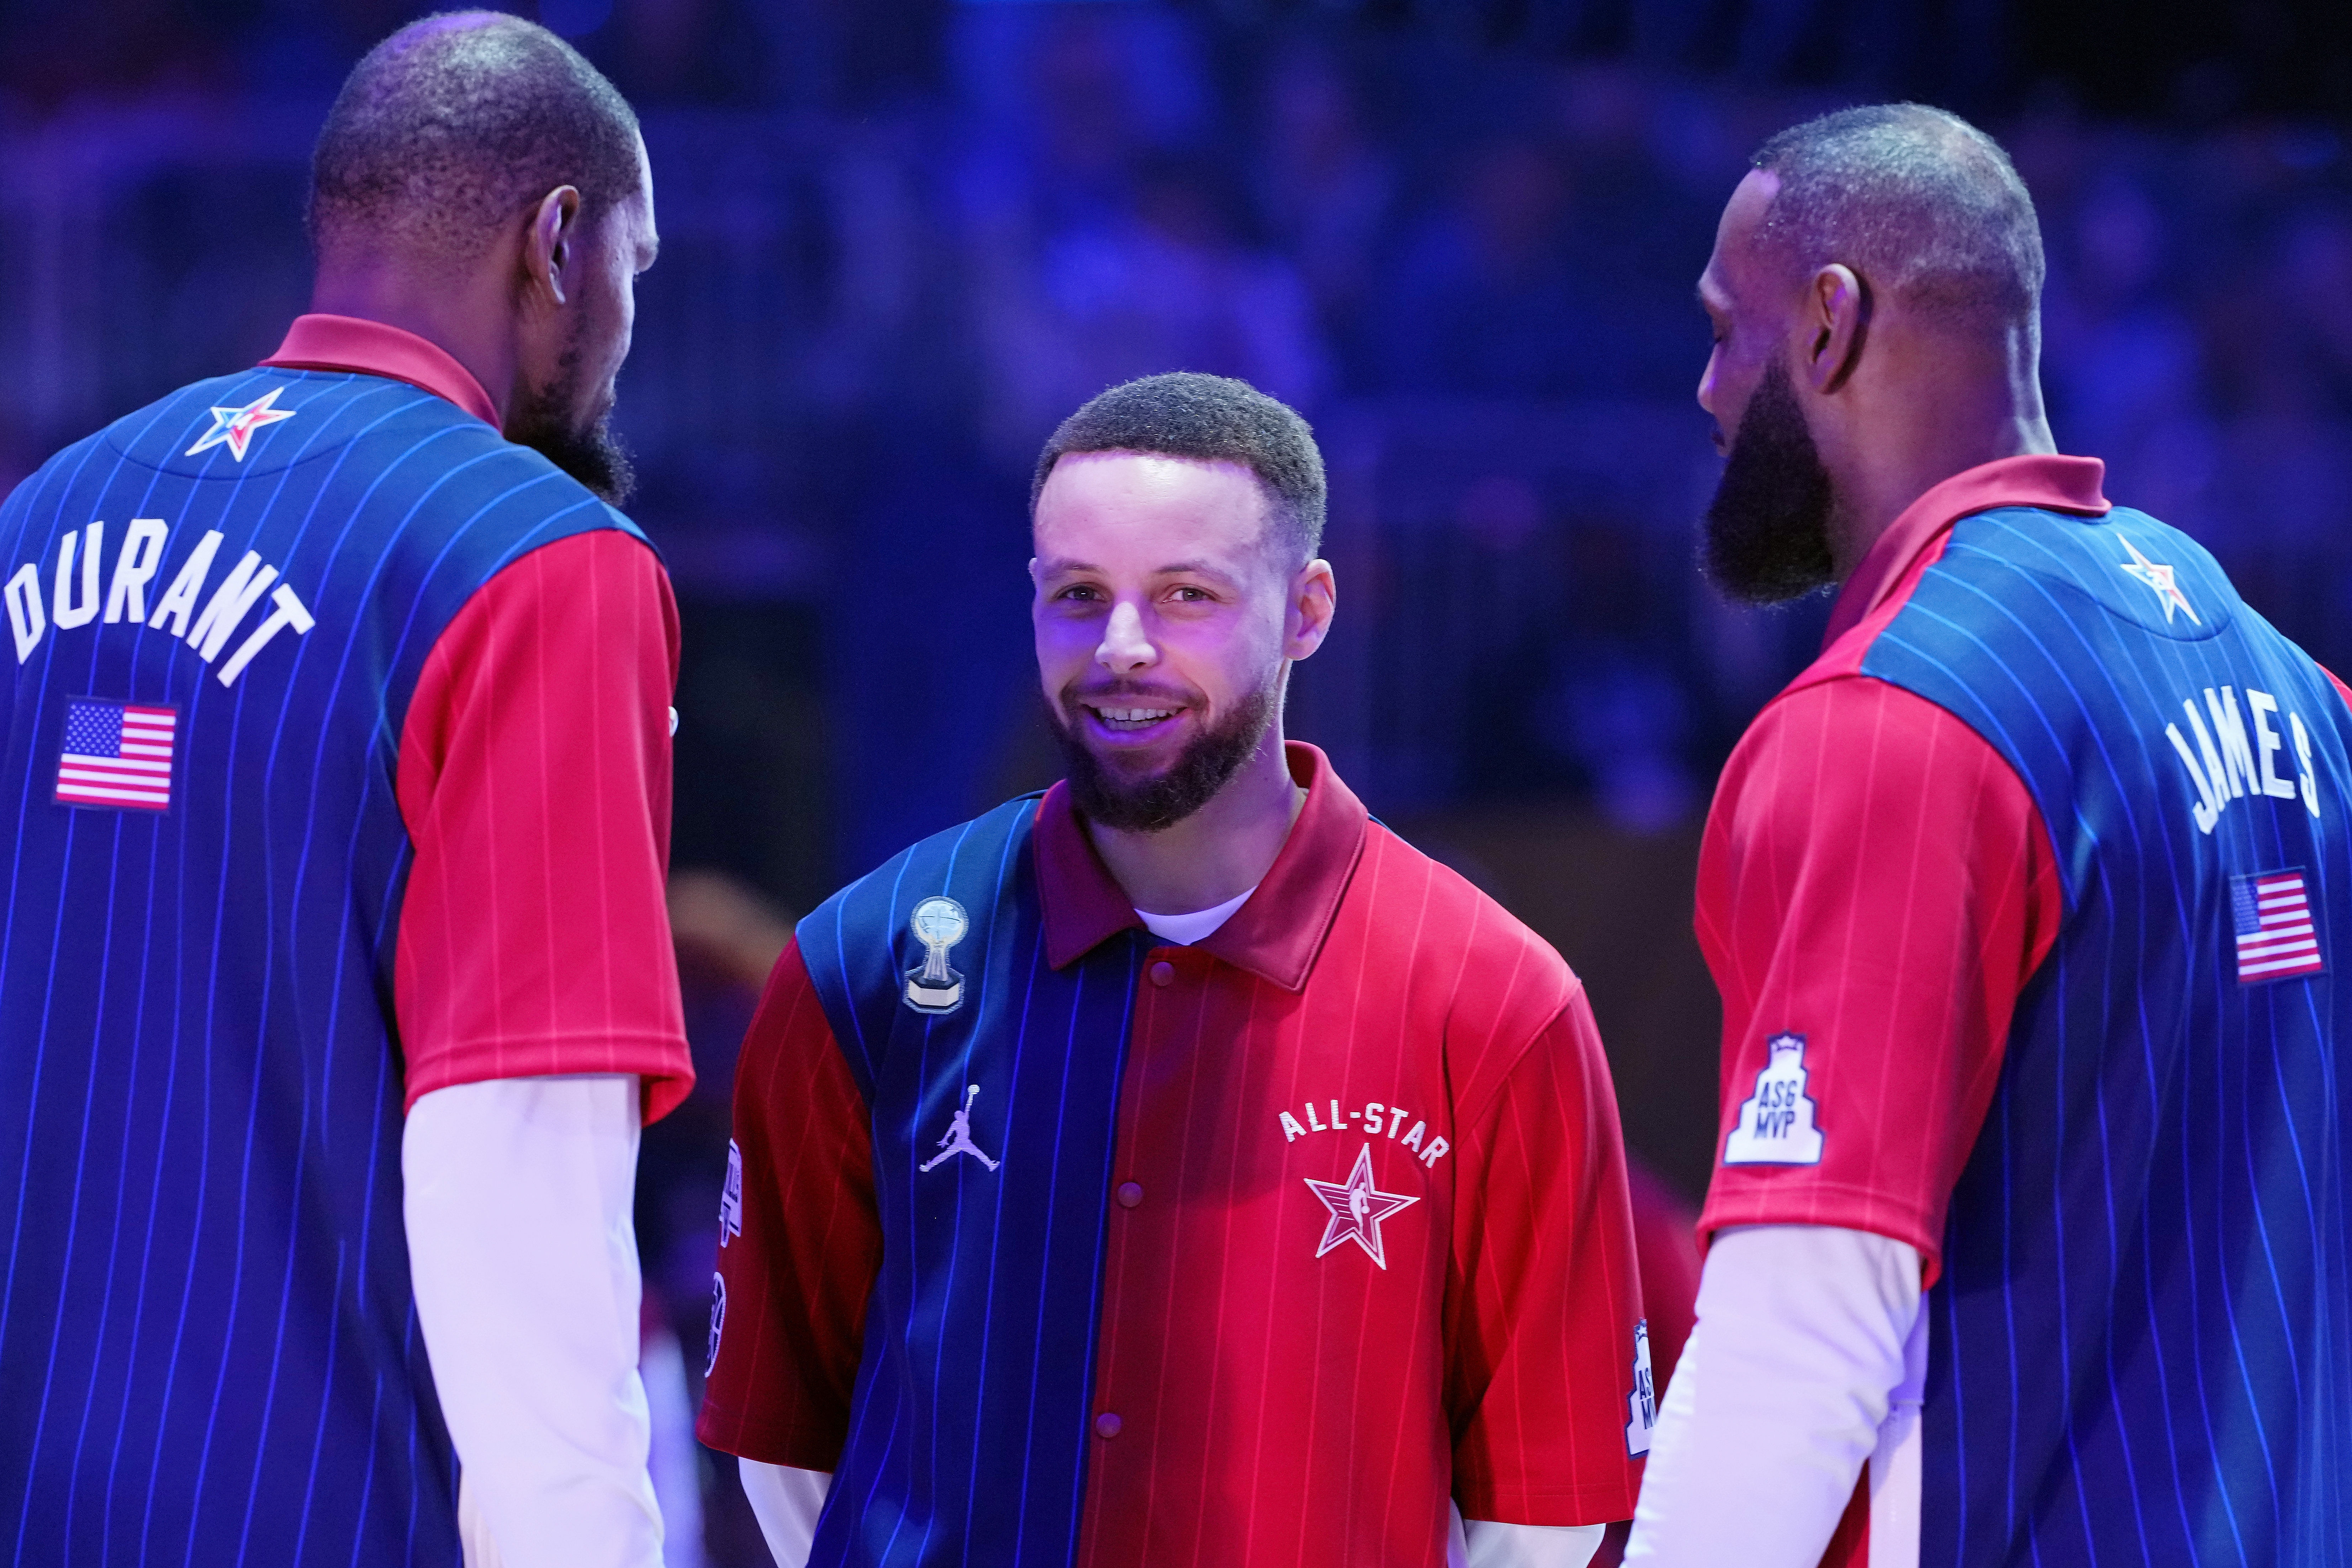 LeBron James, Steph Curry and Kevin Durant are all 35 and older